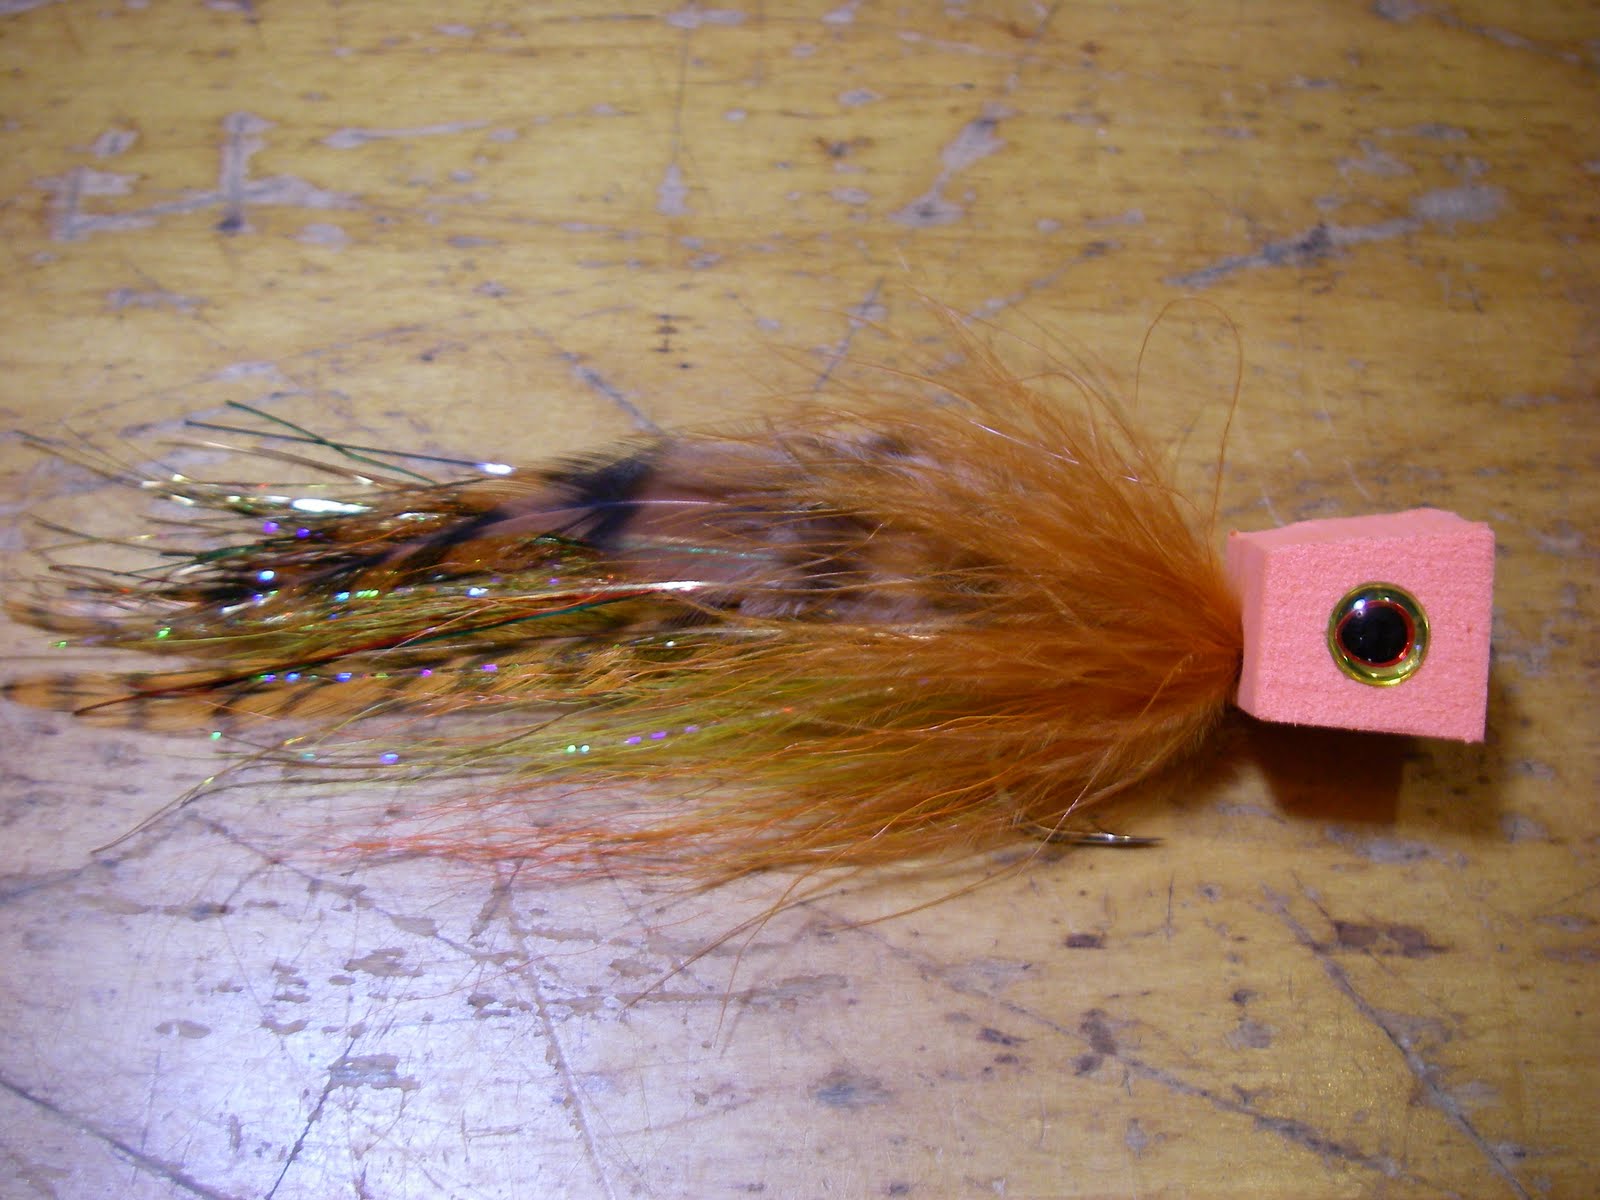 Rabbit Tail Popper Bass trout panfish bunny fly lure tying diy